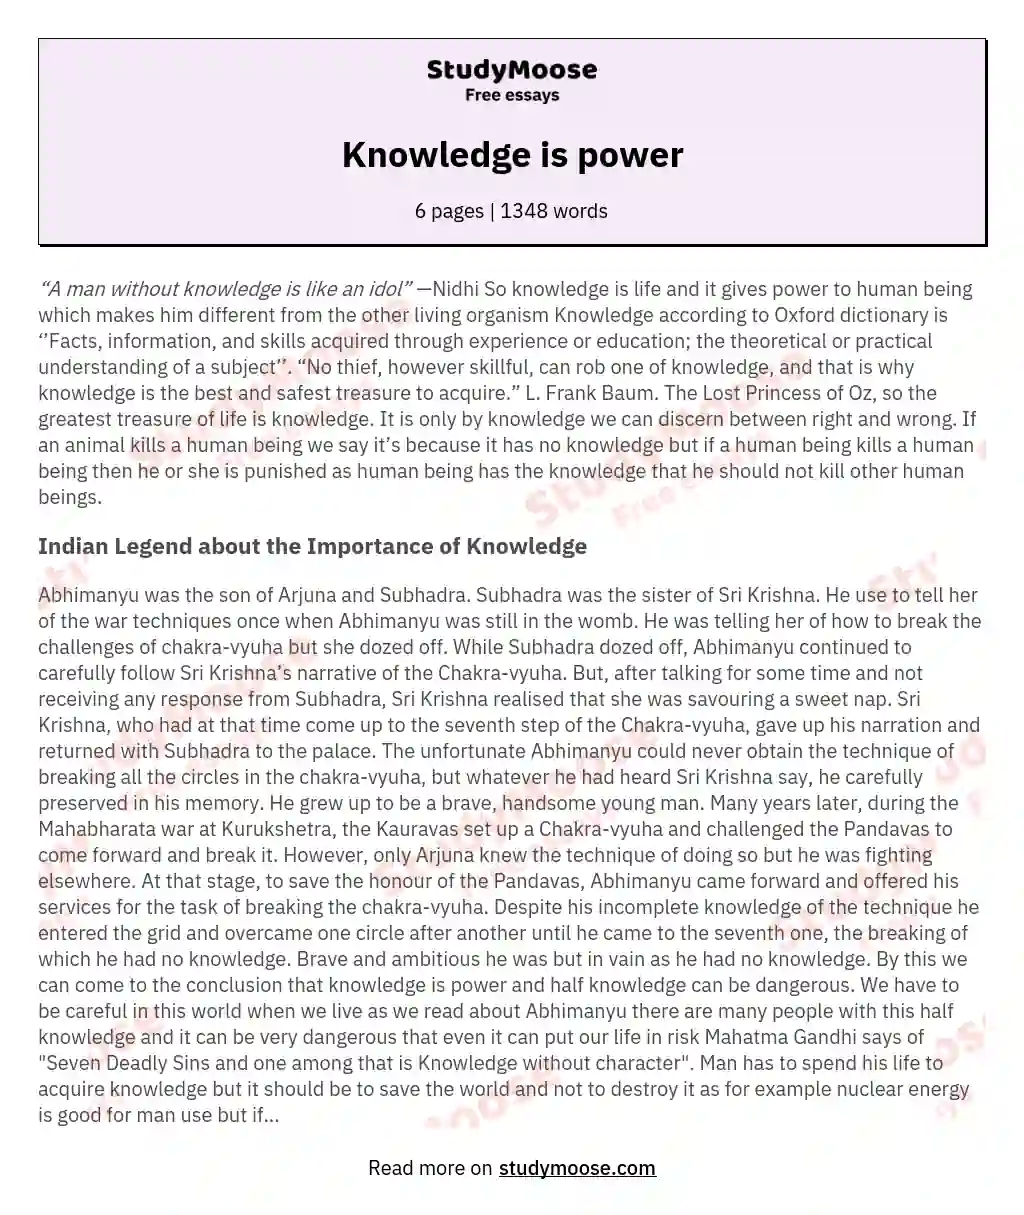 Knowledge is power essay